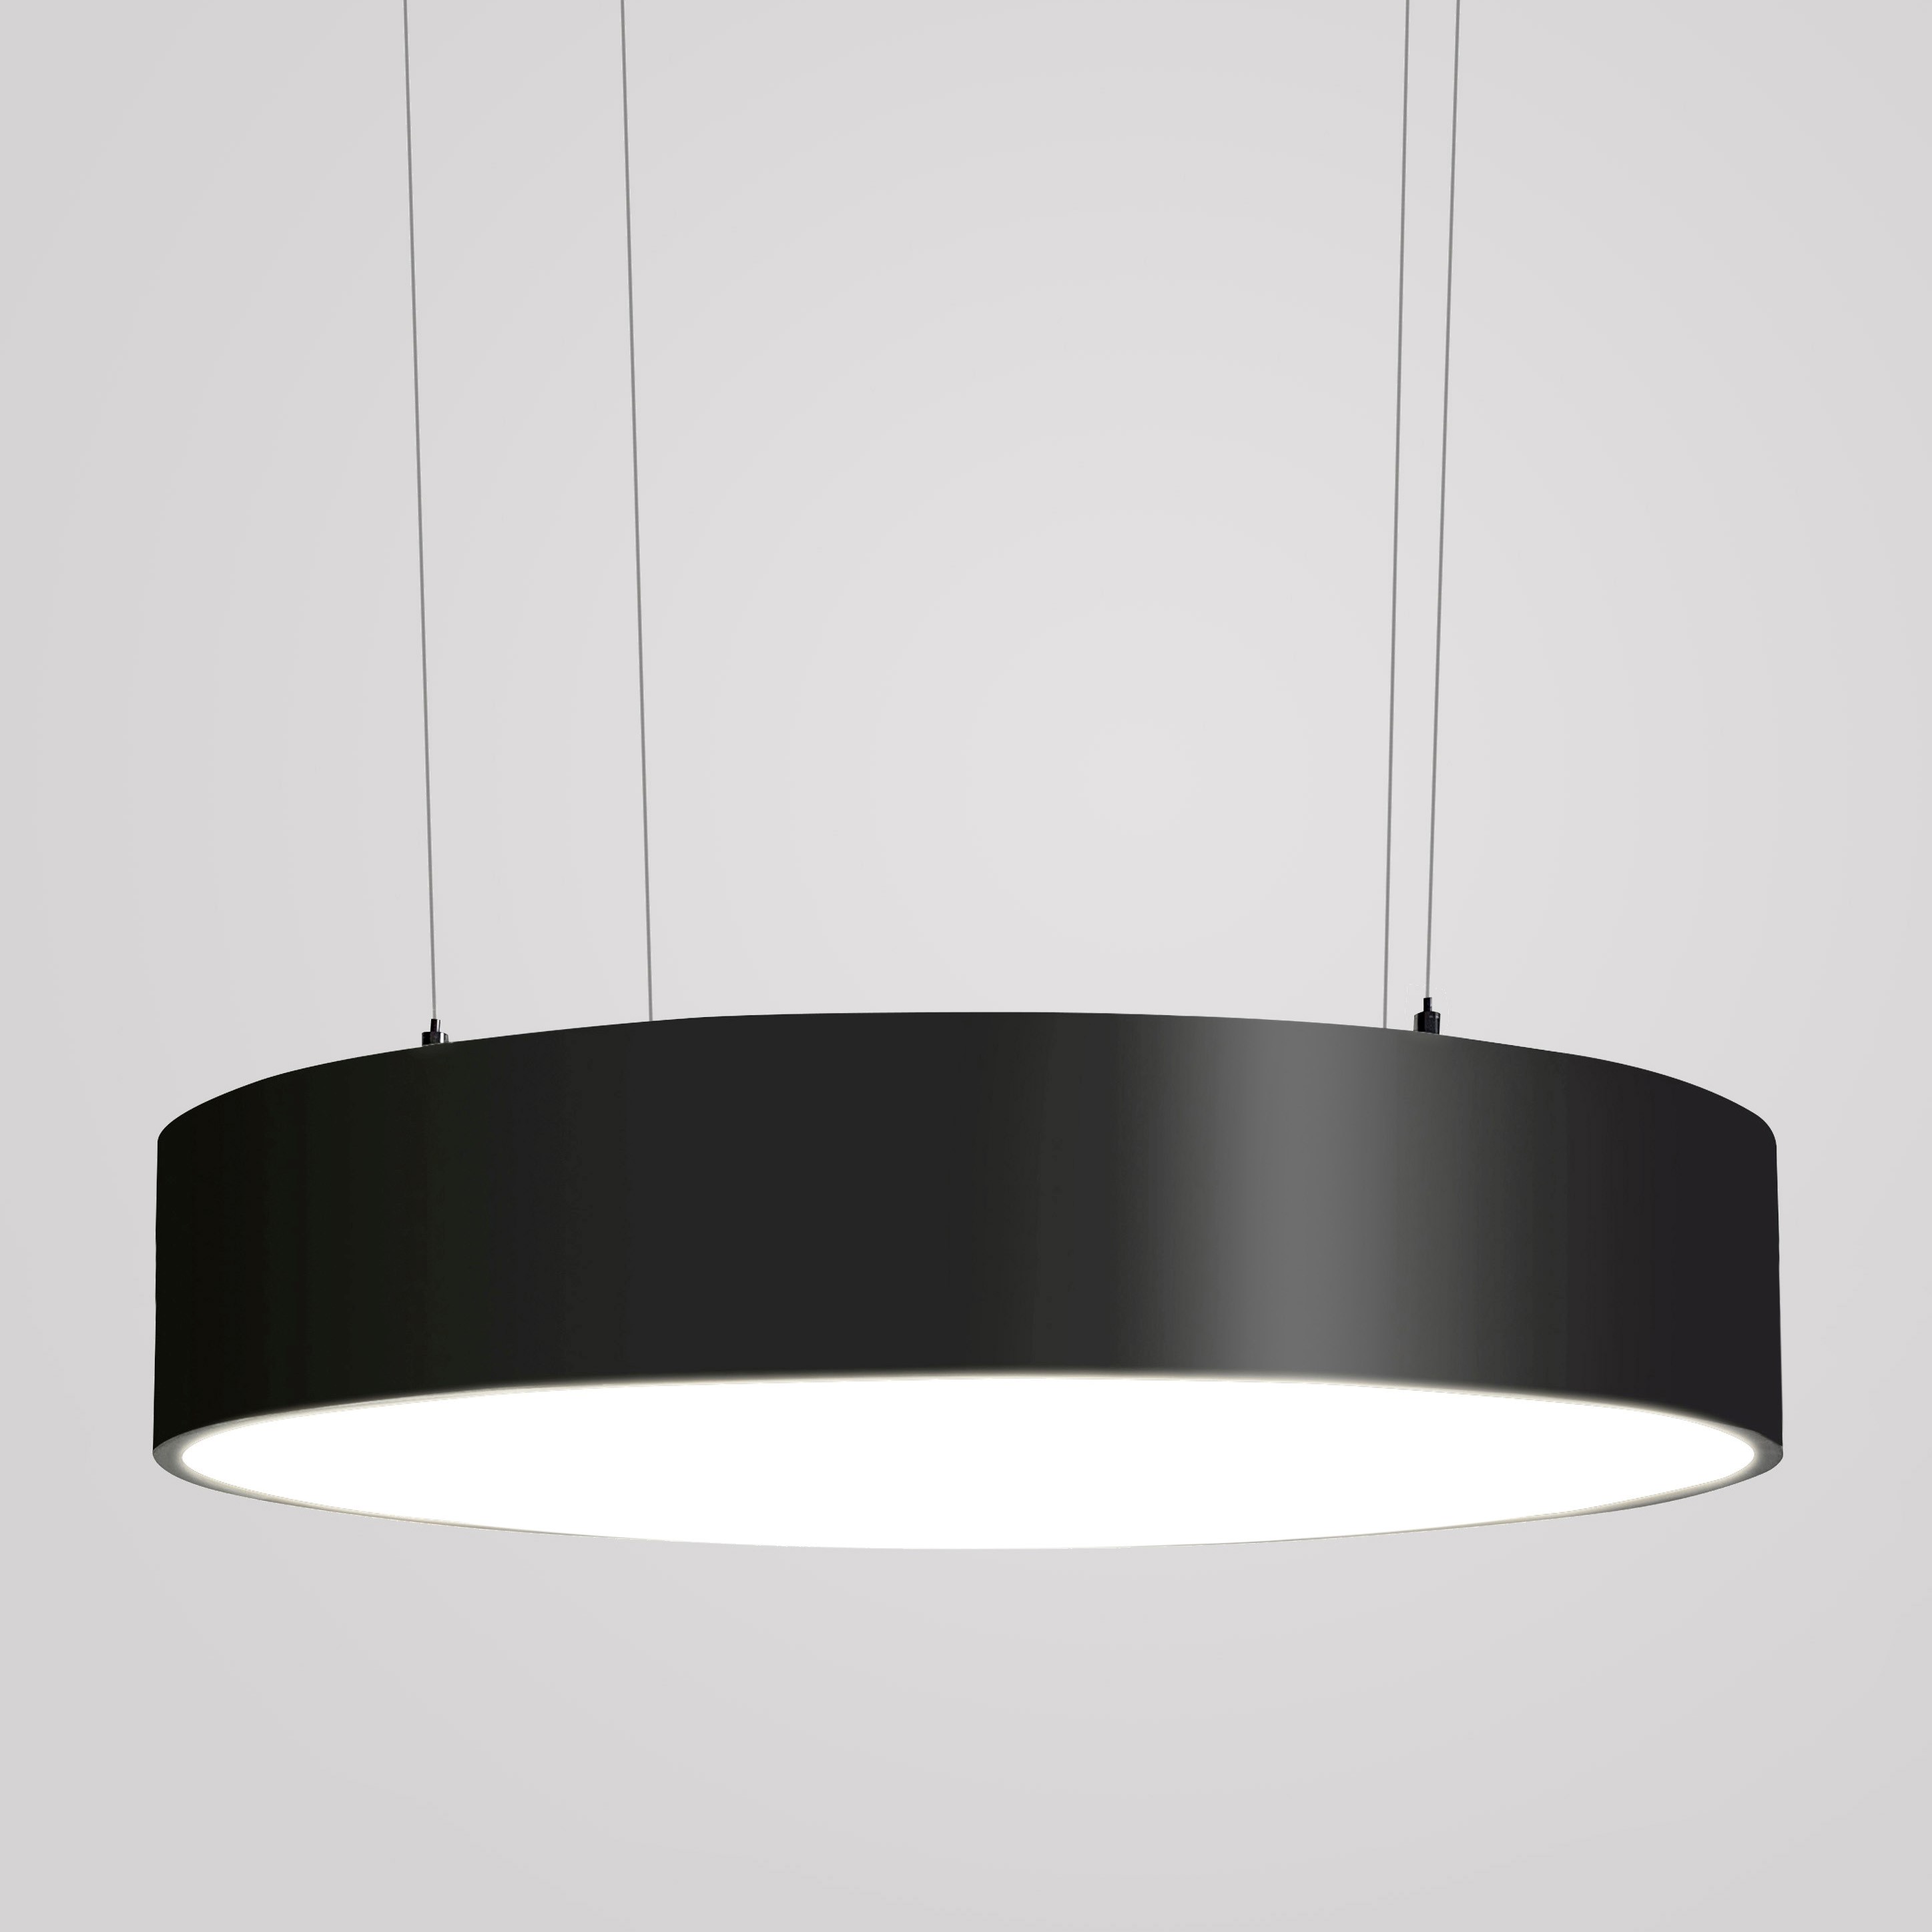 Luminaires of the series BELO_BE_110